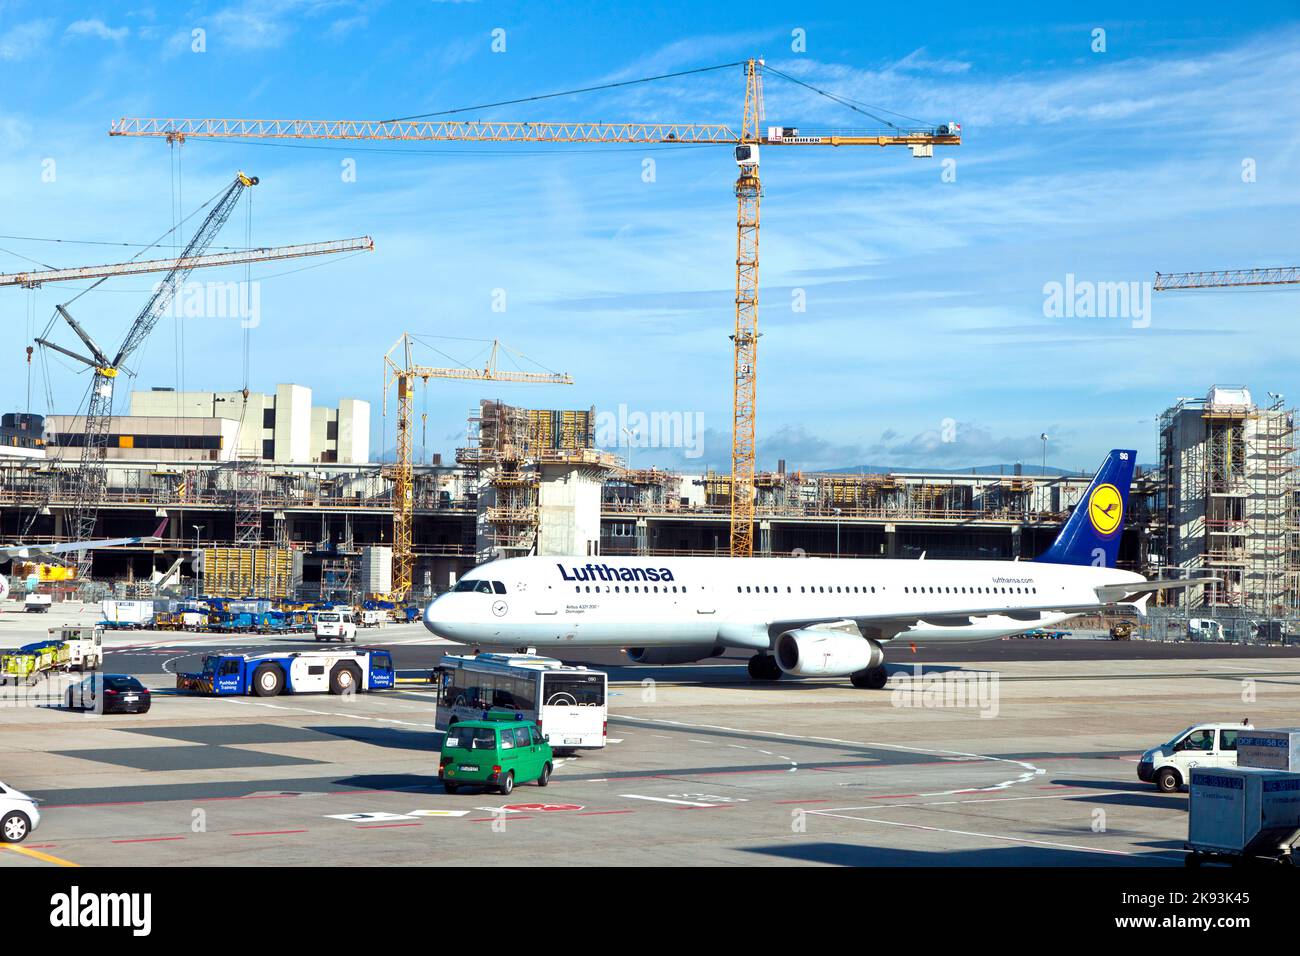 FRANKFURT, GERMANY - AUG 25, 2011: Lufthansa Flight ready to head to runway  in Frankfurt, Germany. New Terminal A is under construction for airport e Stock Photo